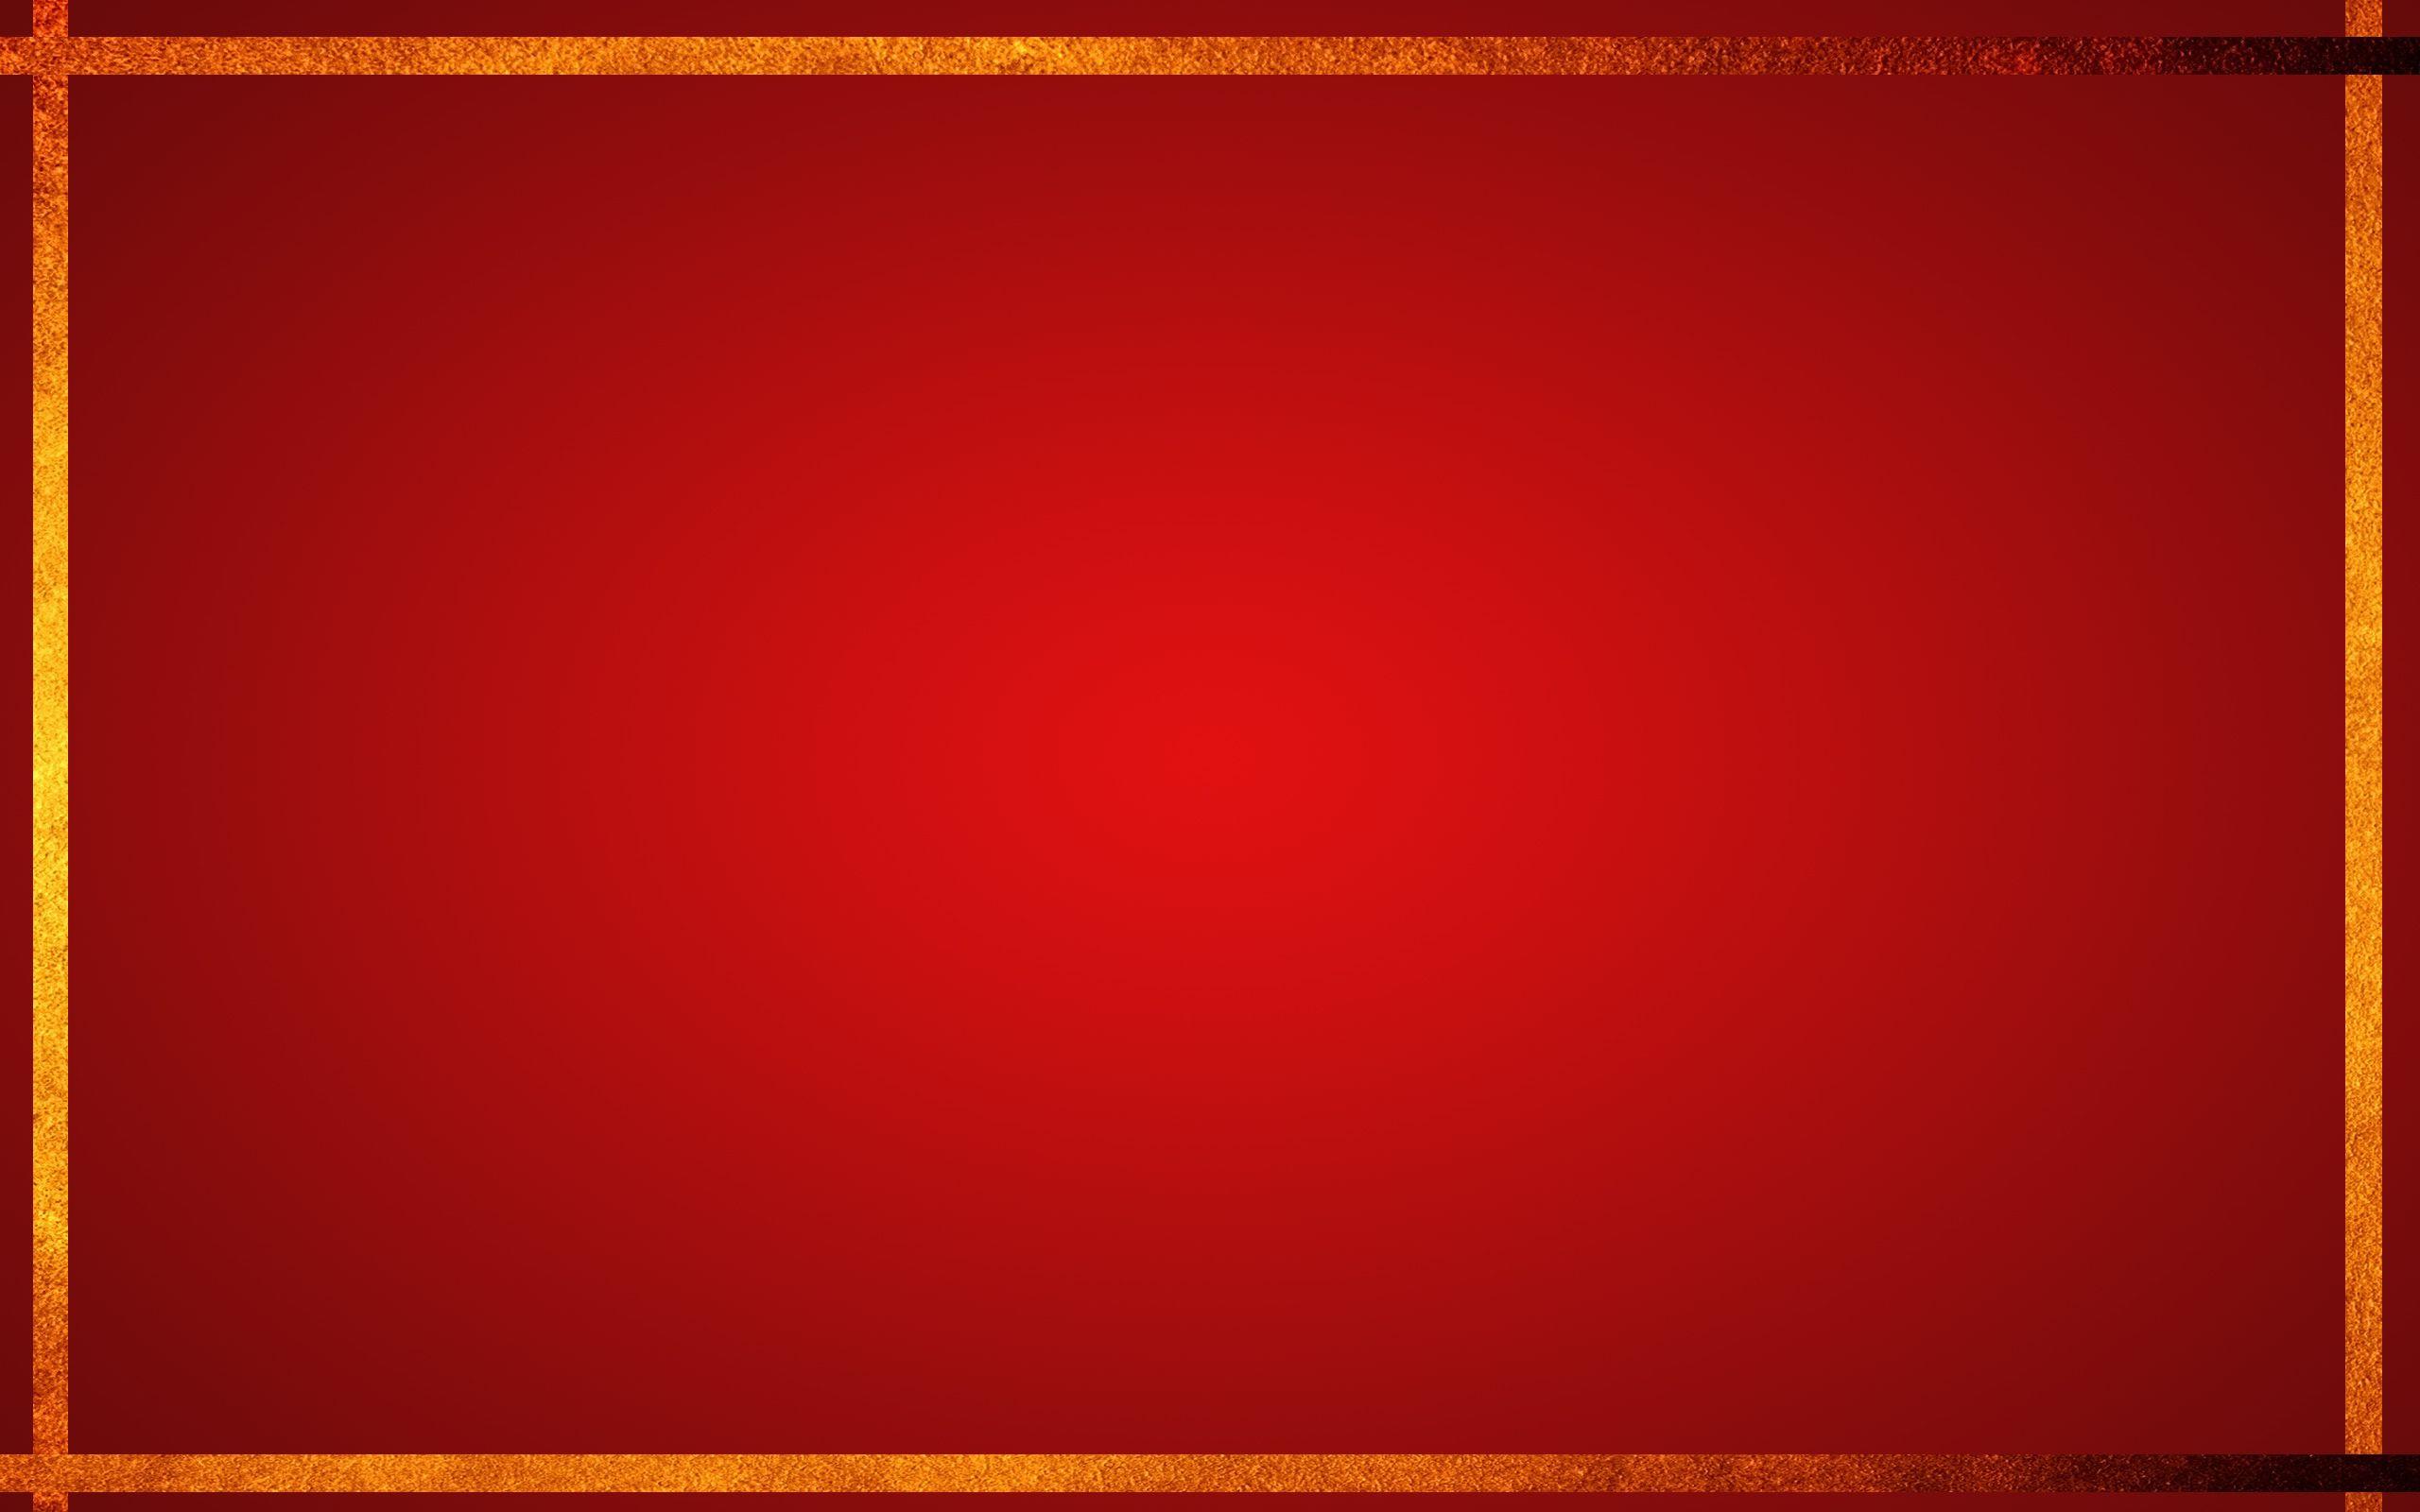 Red Gold Border Wallpaper Free Red Gold Border Background